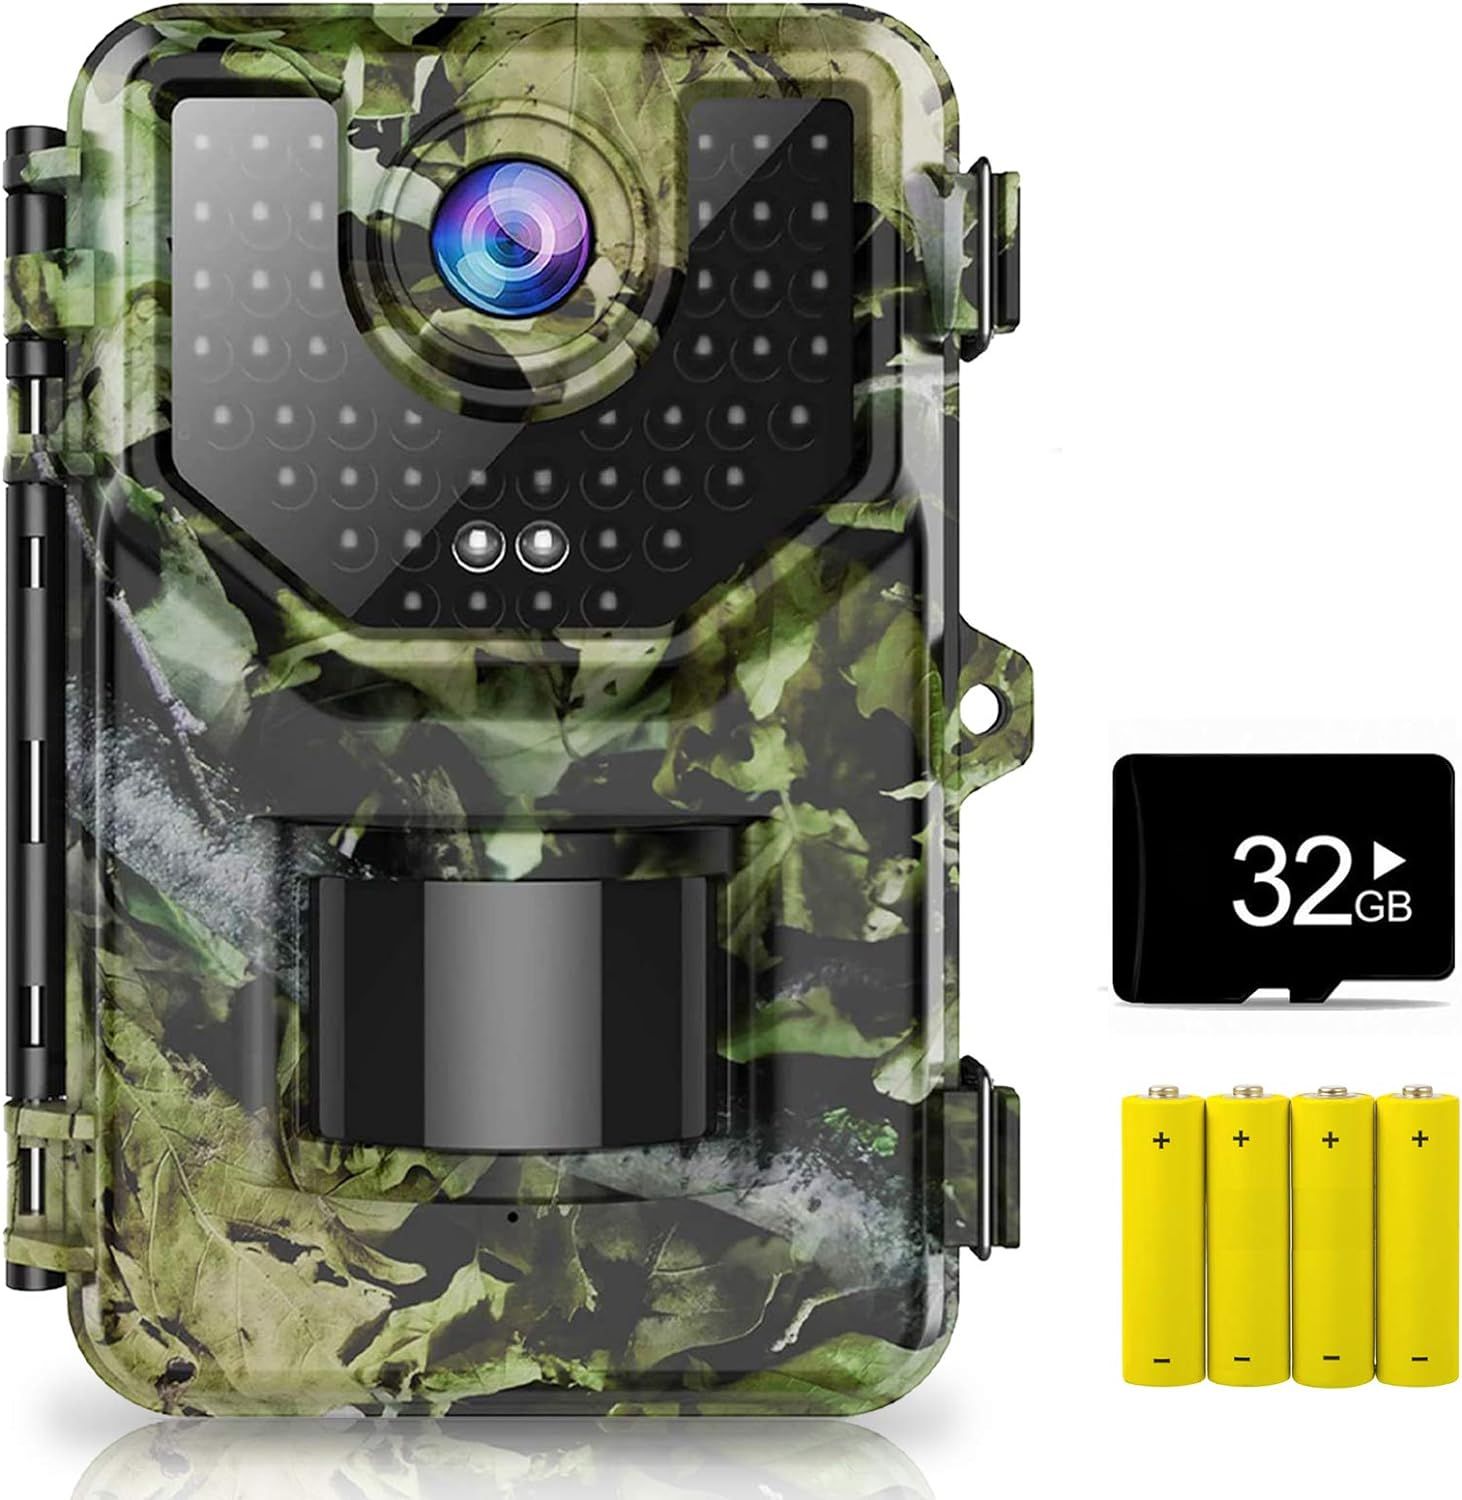 1080P 16MP Trail Camera, Hunting Camera with 120°Wide-Angle Motion Latest Sensor View 0.2s Trigg... | Amazon (US)